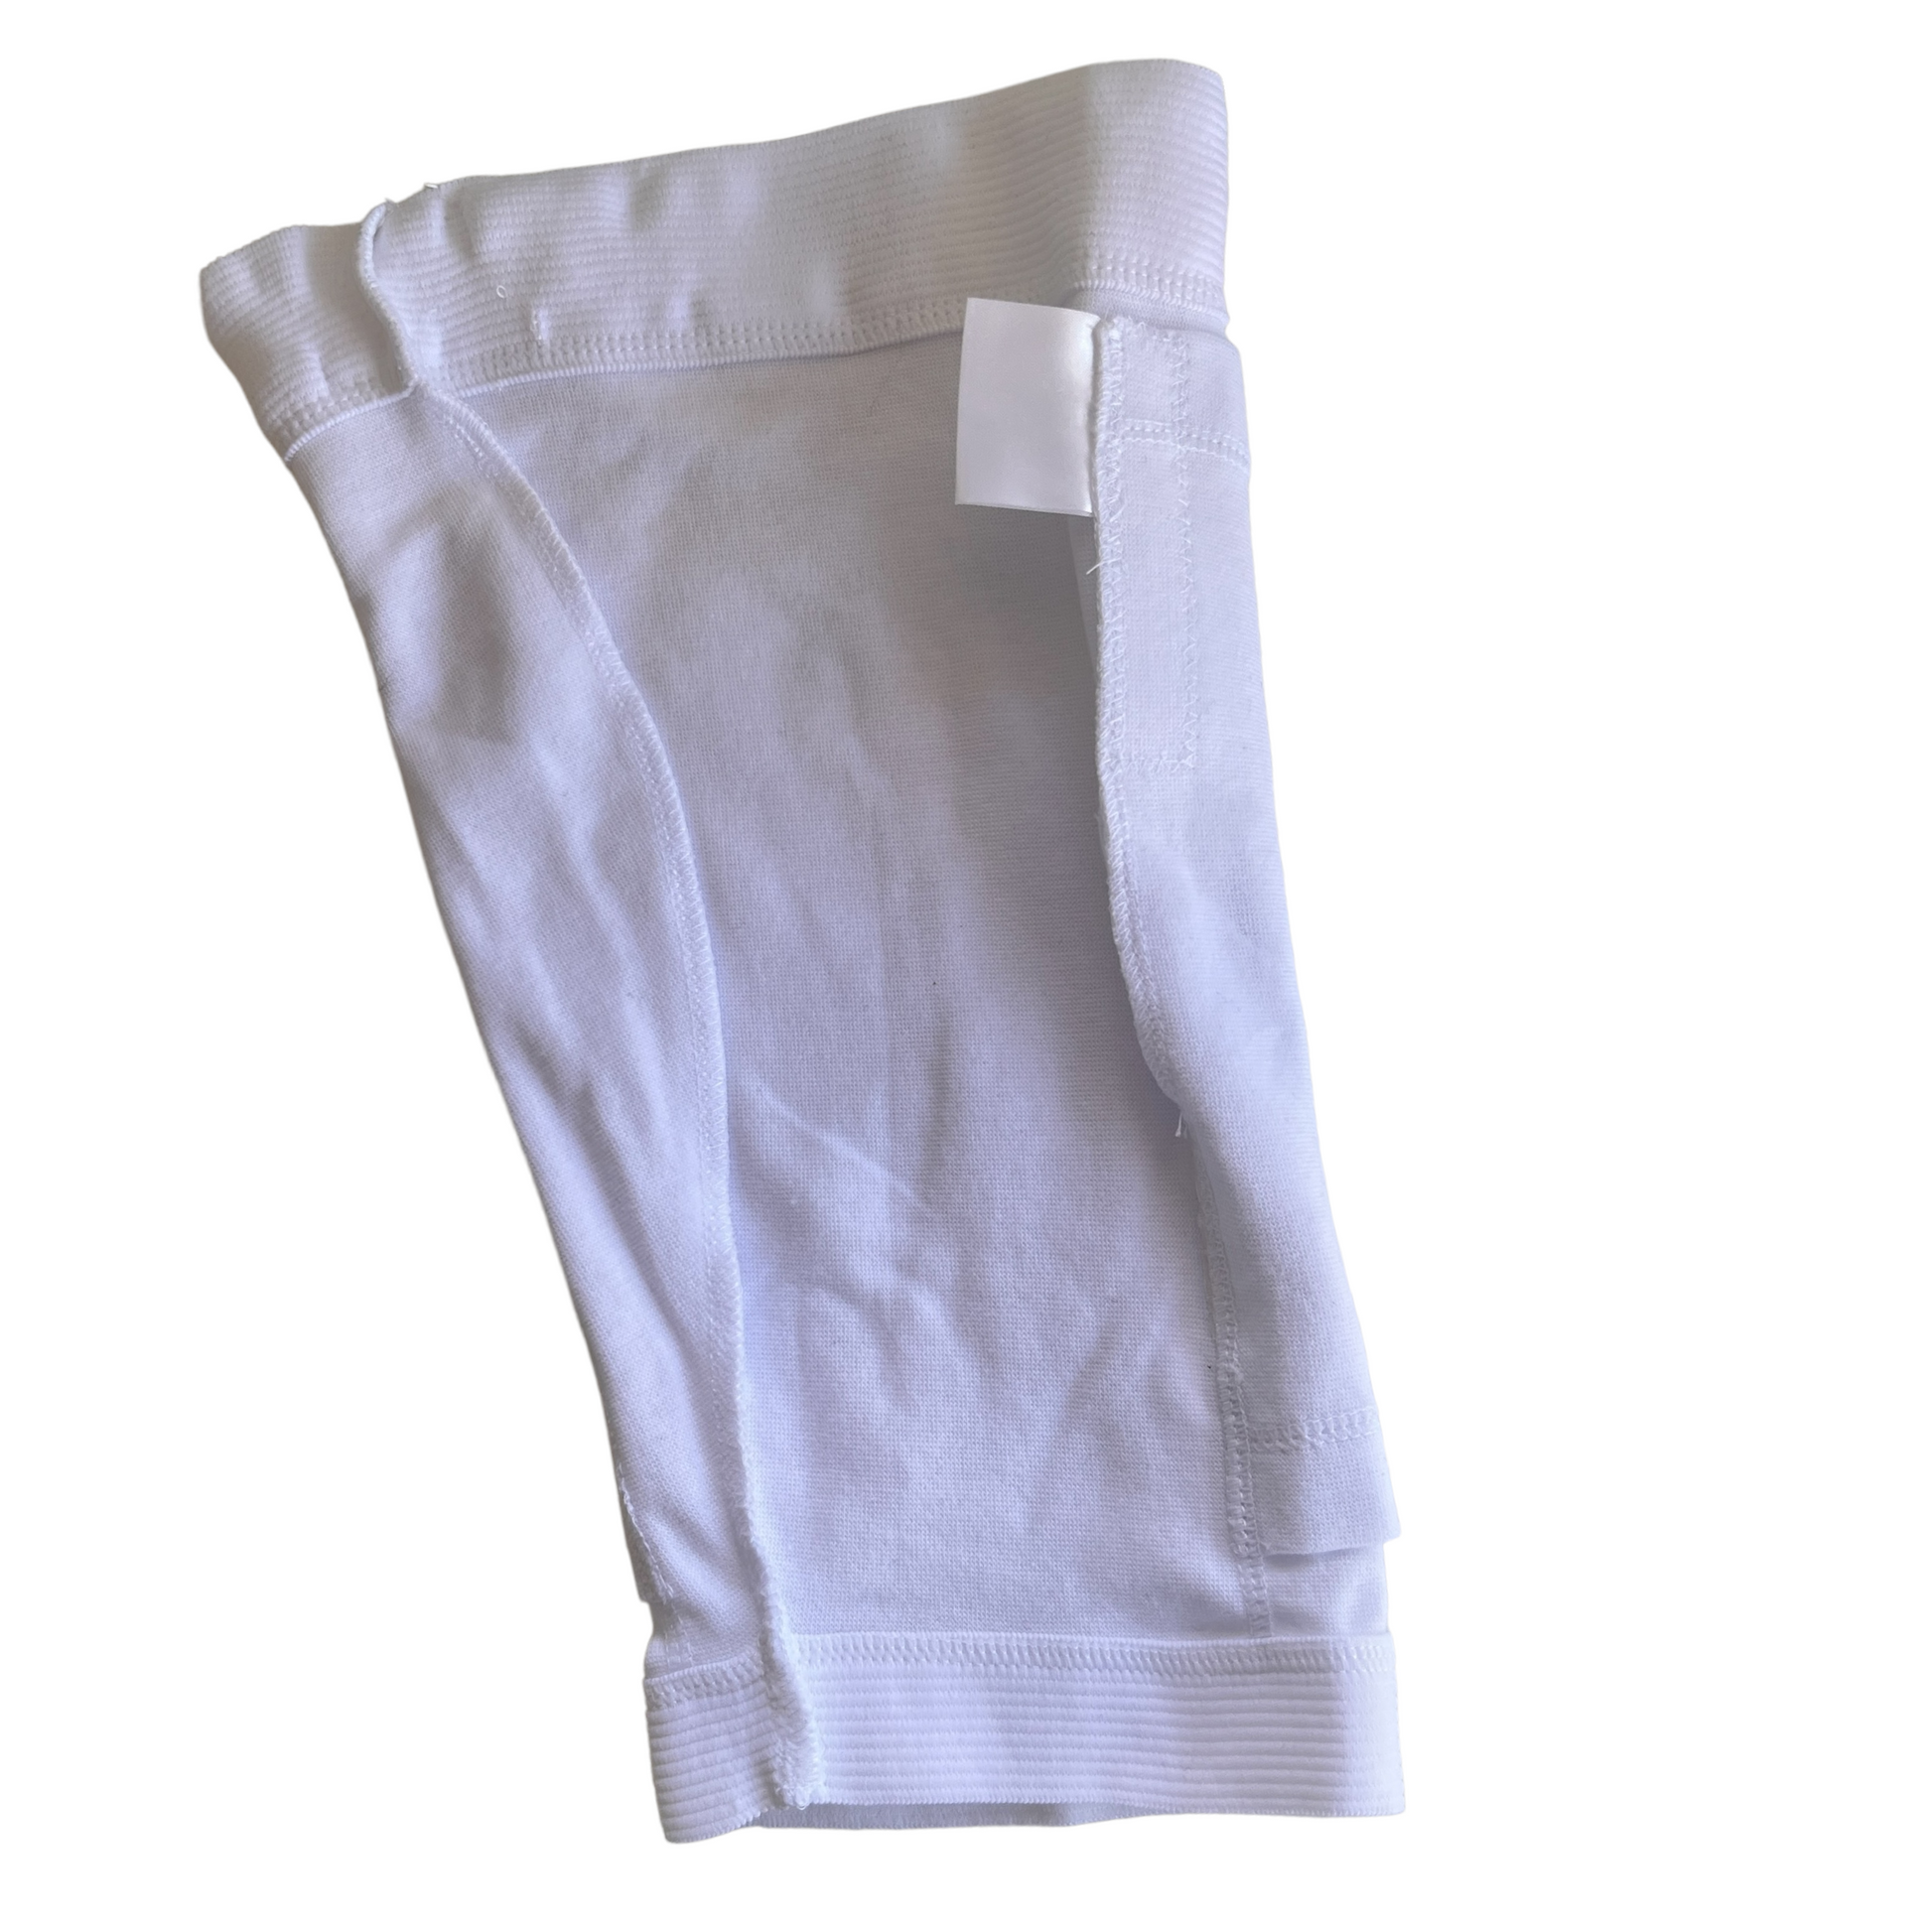 ❤️📸 Compression Sleeve — For Catheter Bag Incontinence Aids SPIRIT SPARKPLUGS   